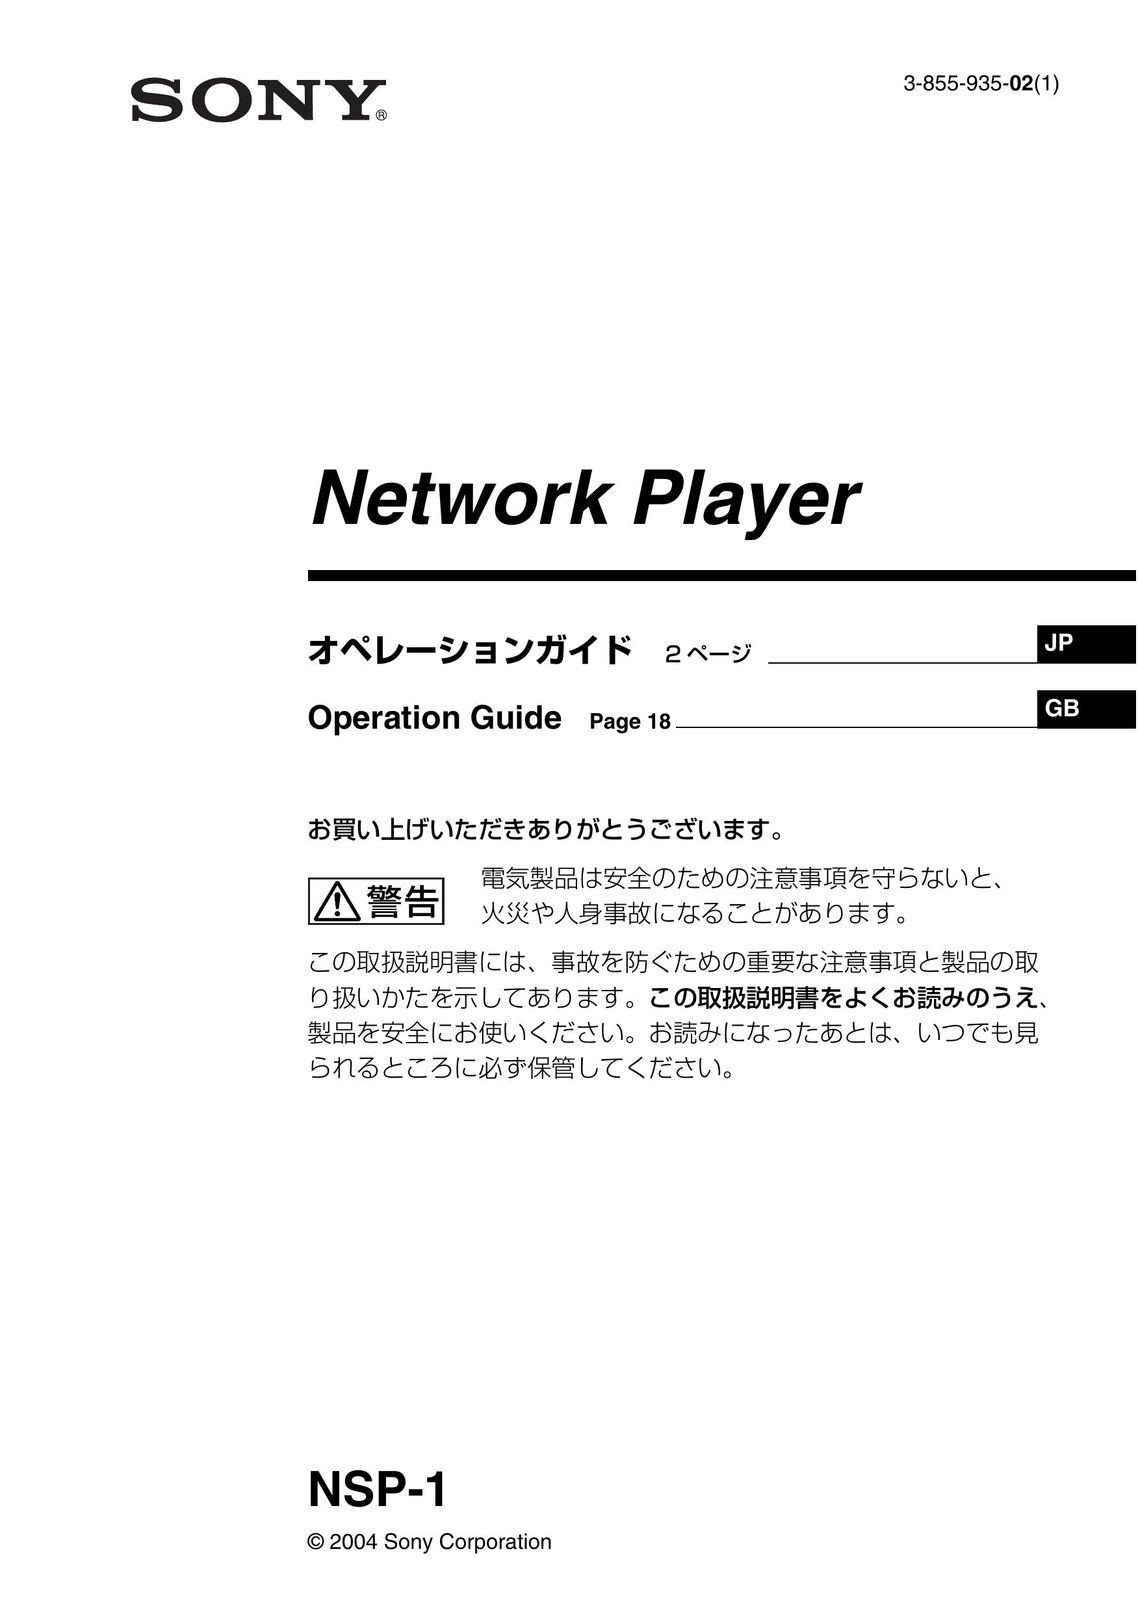 Sony 3-855-935-02(1) Network Router User Manual